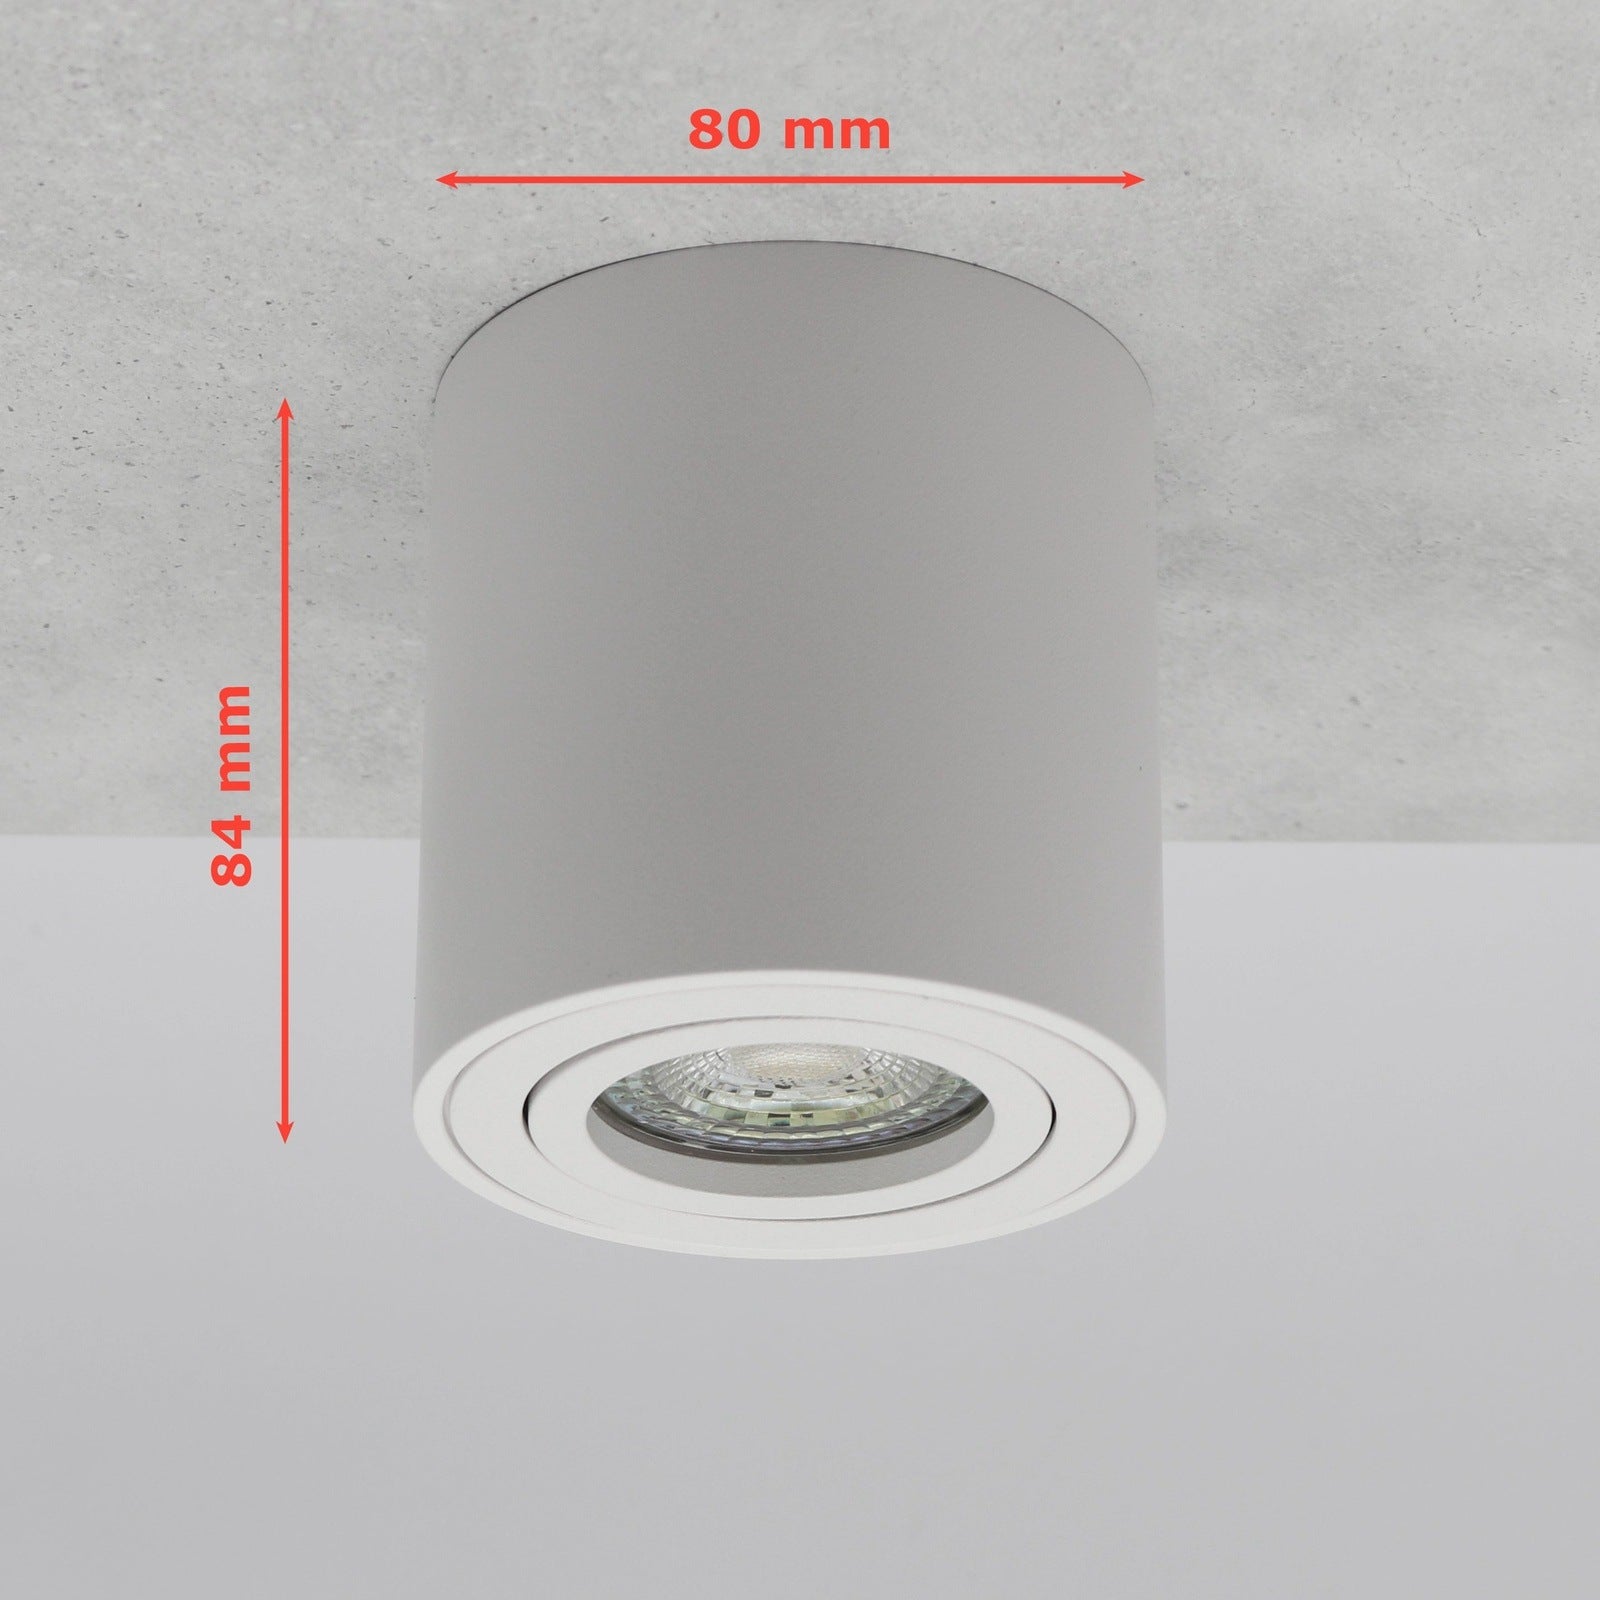 Black novoom light LED Milano Dimmable 230V surface-mounted Surface-mounted – ceiling spotlight GU10 6.2W Round light